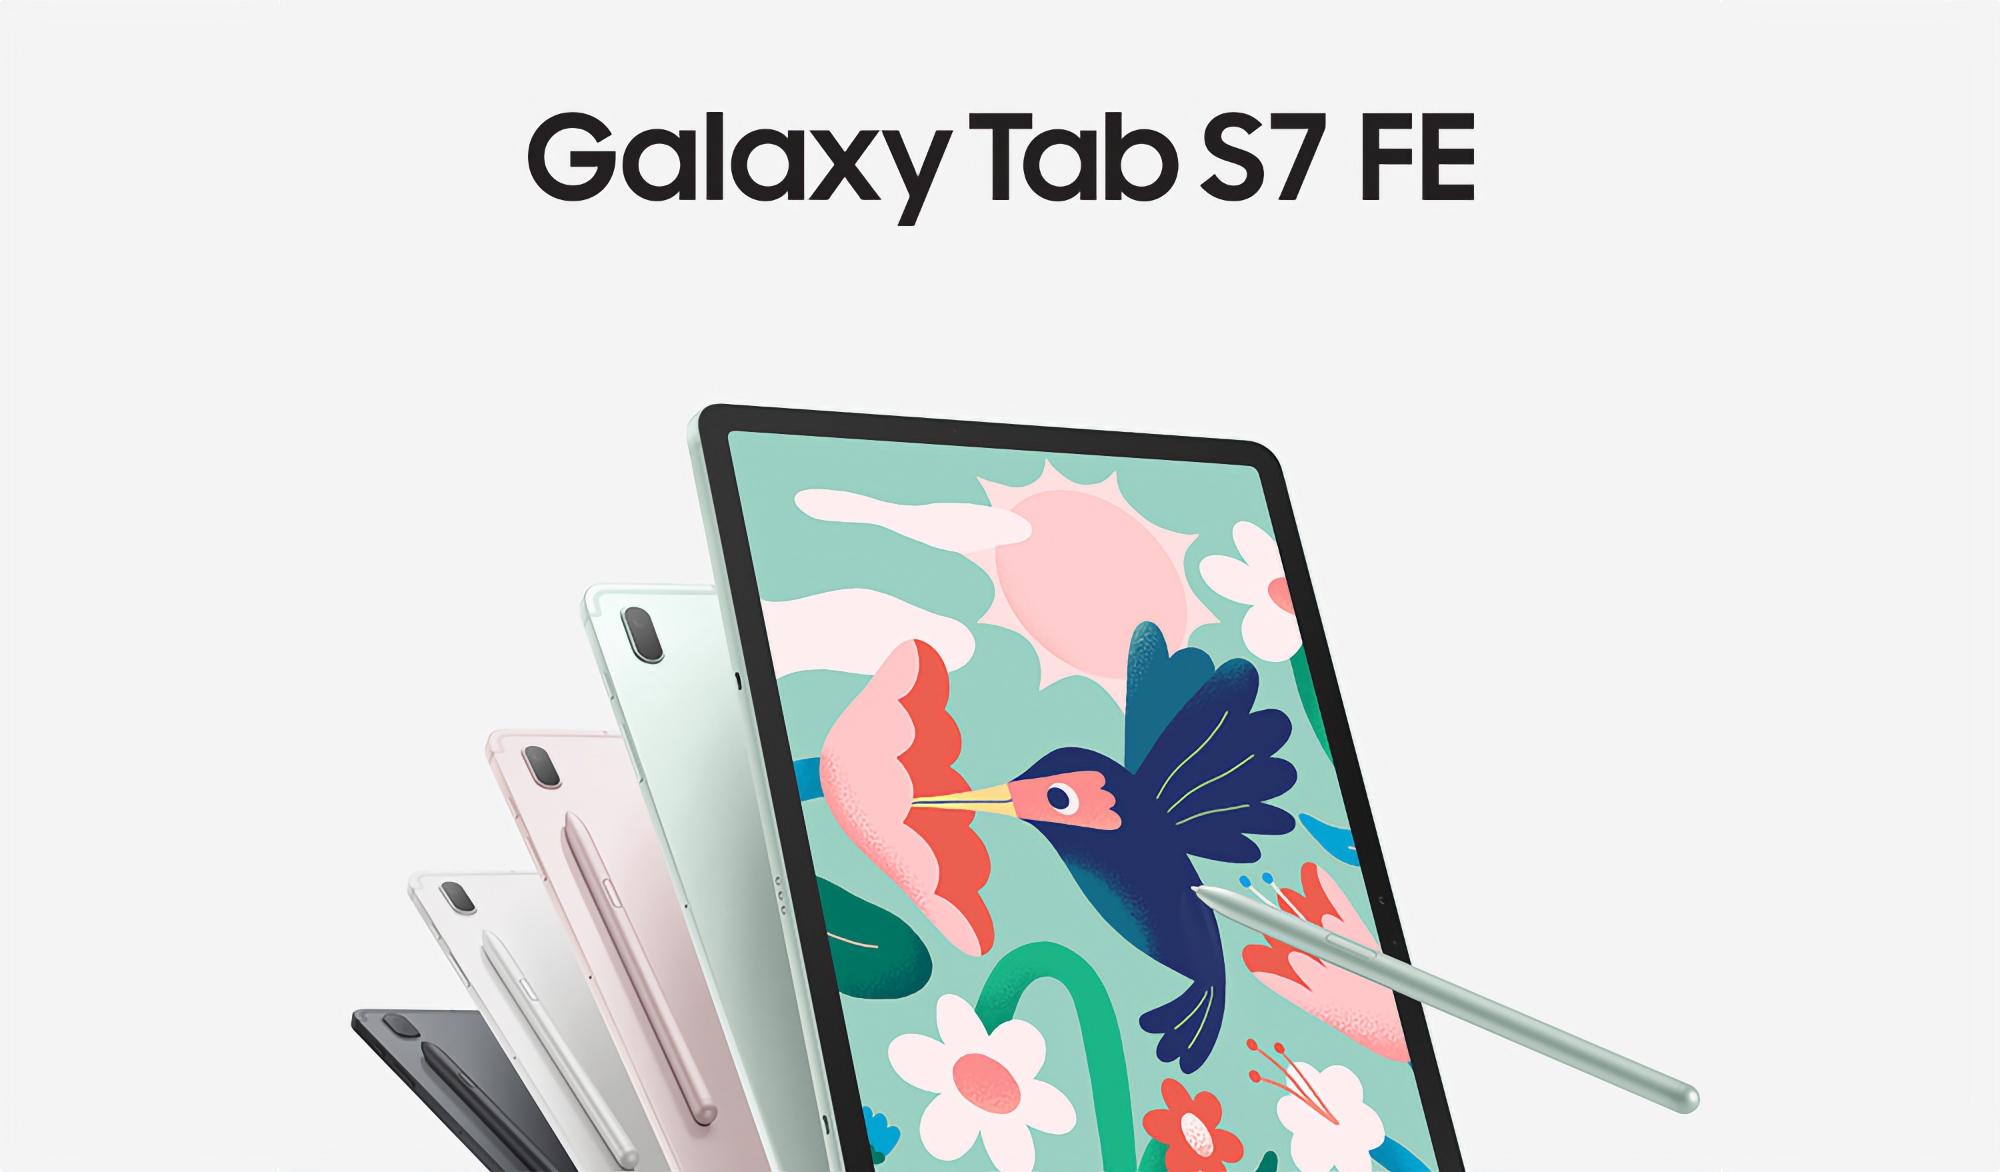 Samsung Galaxy Tab S7 FE with a 12.4″ screen, Snapdragon 750G chip and S Pen bundled is available for $130 off on Amazon